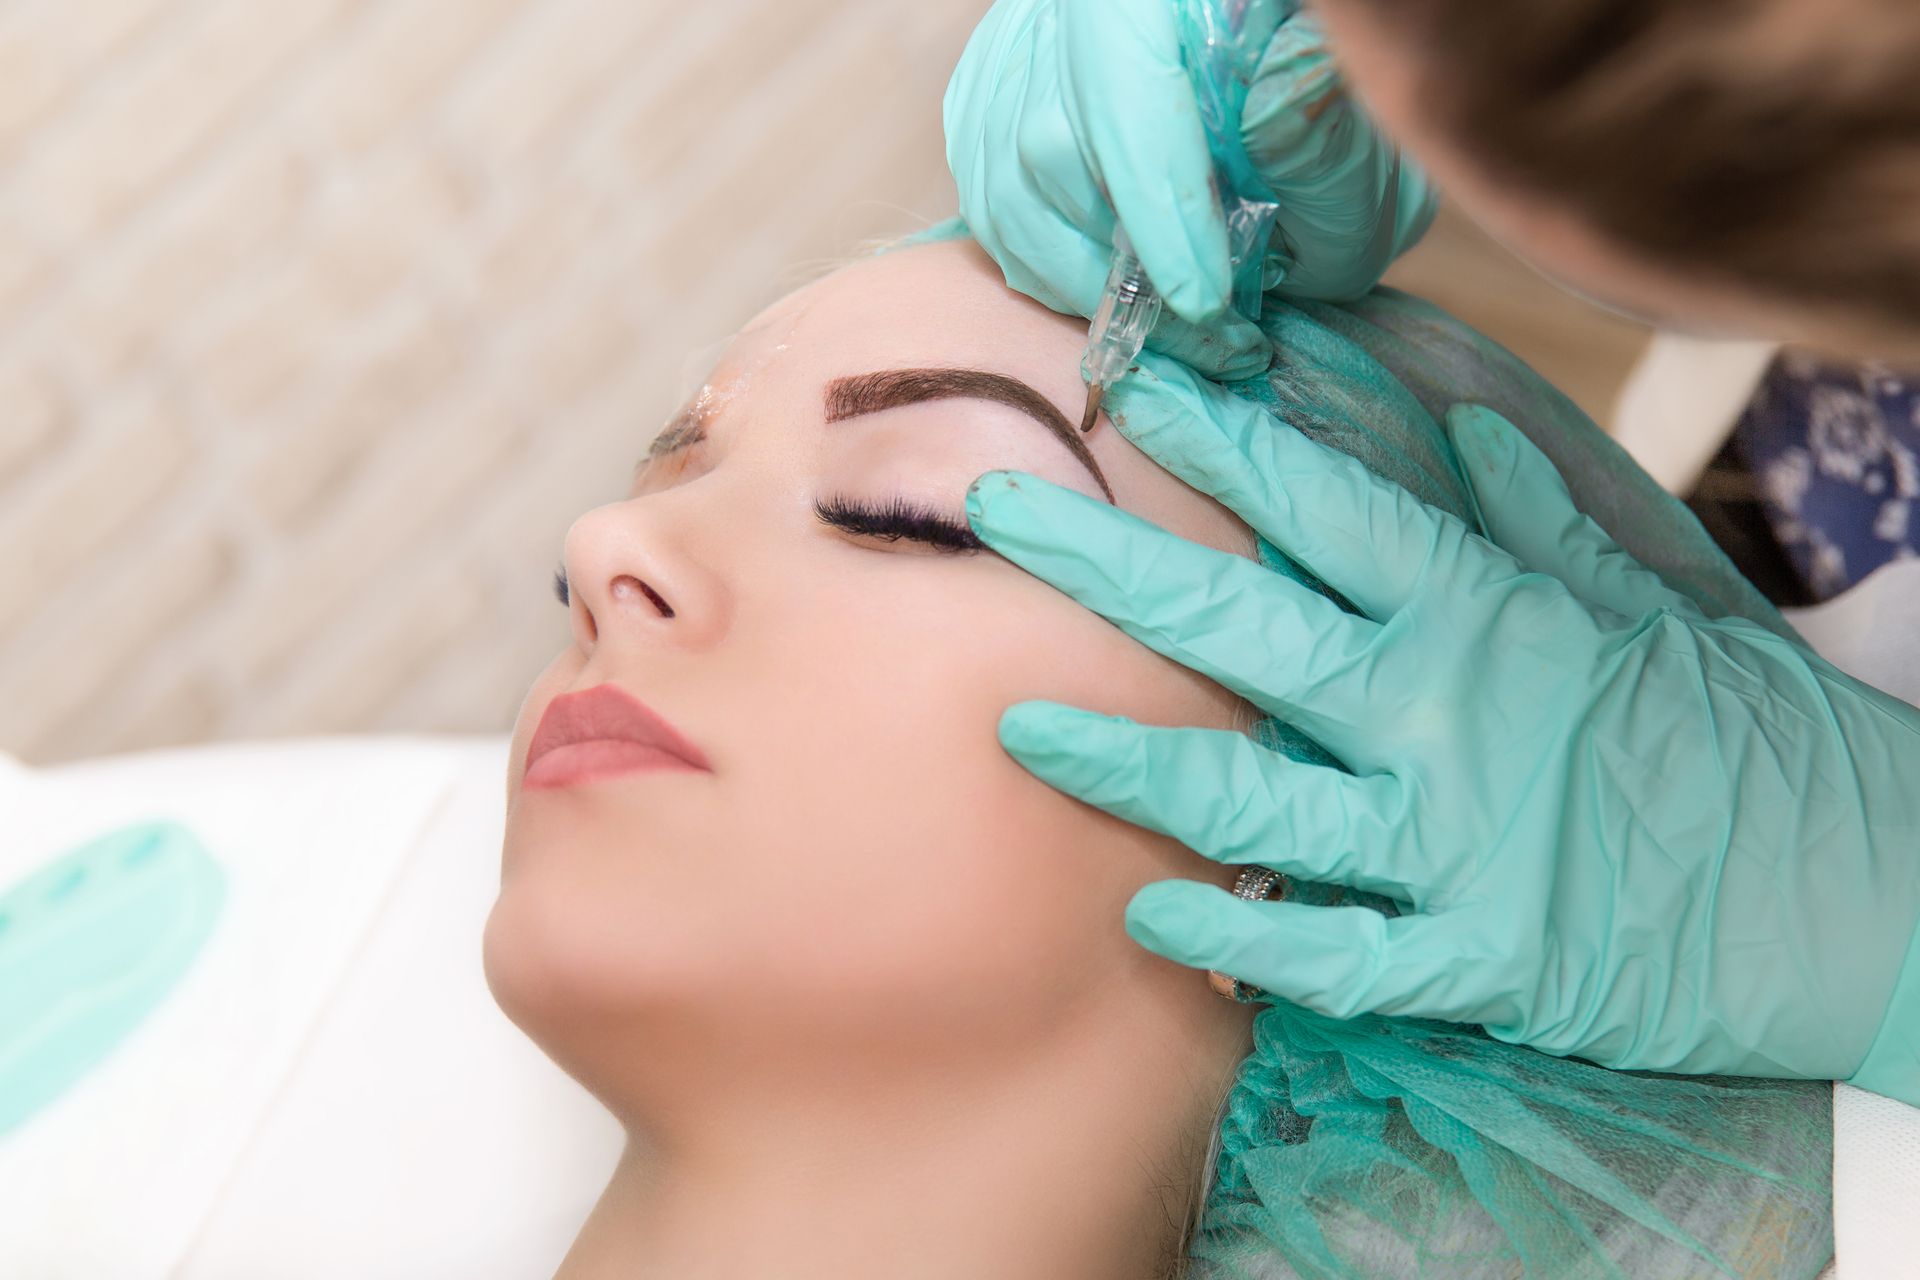 A woman is getting a semi - permanent makeup tattoo on her eyebrows.